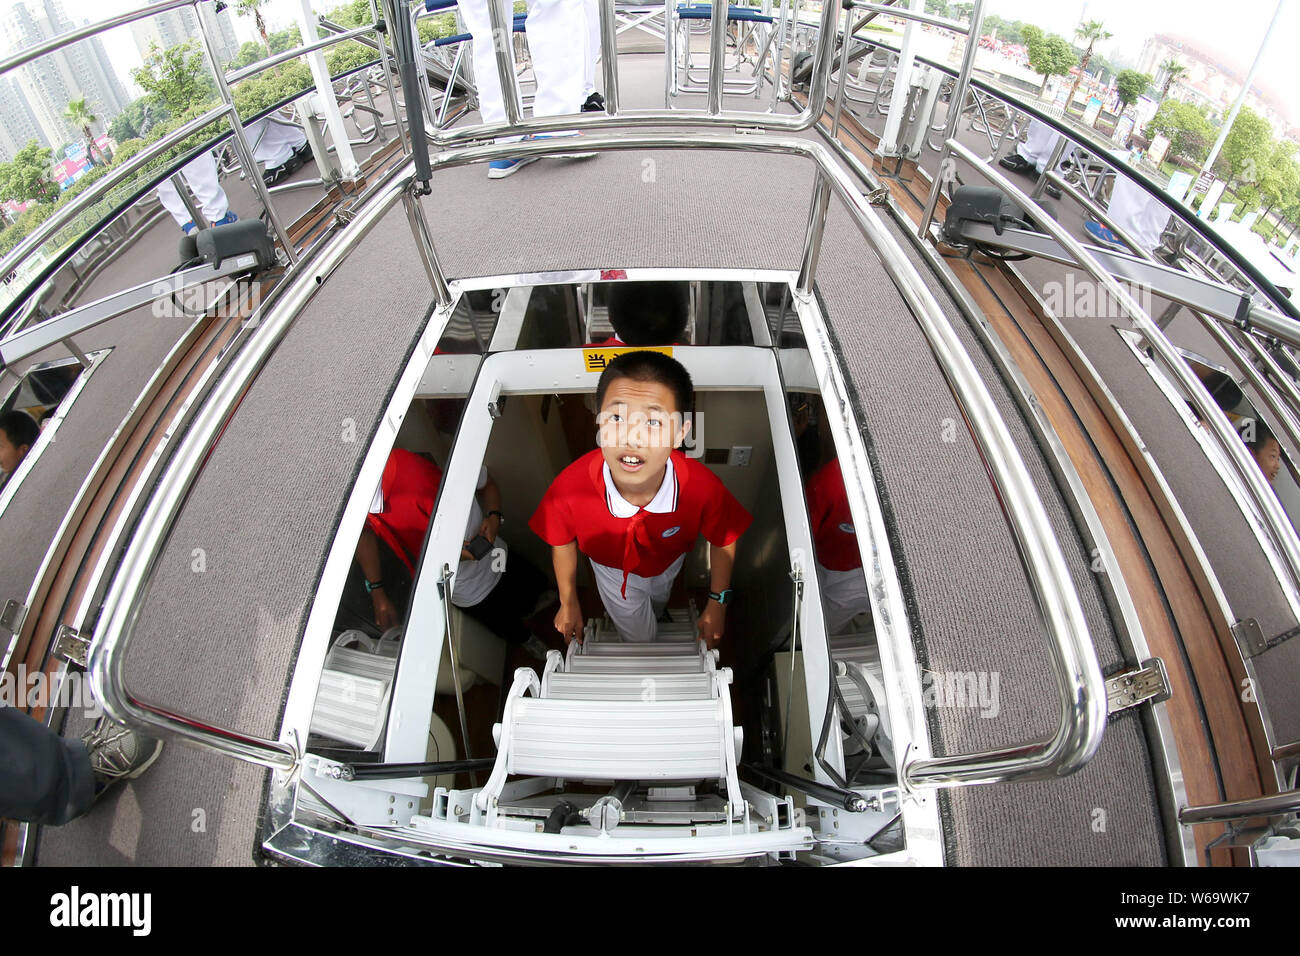 People visit the roof of a luxury recreational vehicle (RV) designed by German industrial designer Luigi Colani in Changzhou city, east China's Jiangs Stock Photo